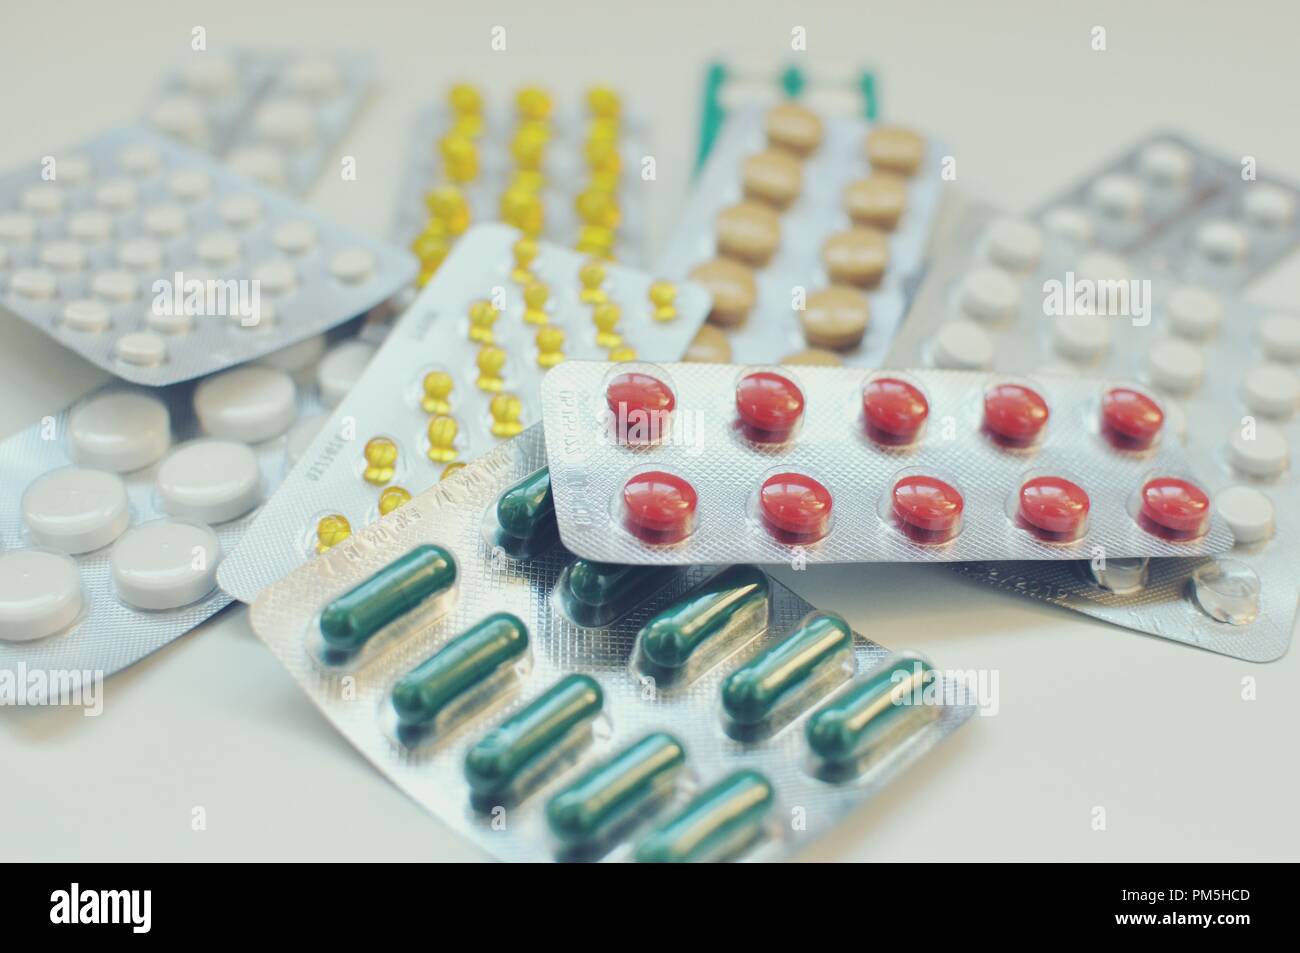 Concept of a close up view of blisters with colored pills, medicine capsules. Medicament (medicine) for health care prescription. Stock Photo